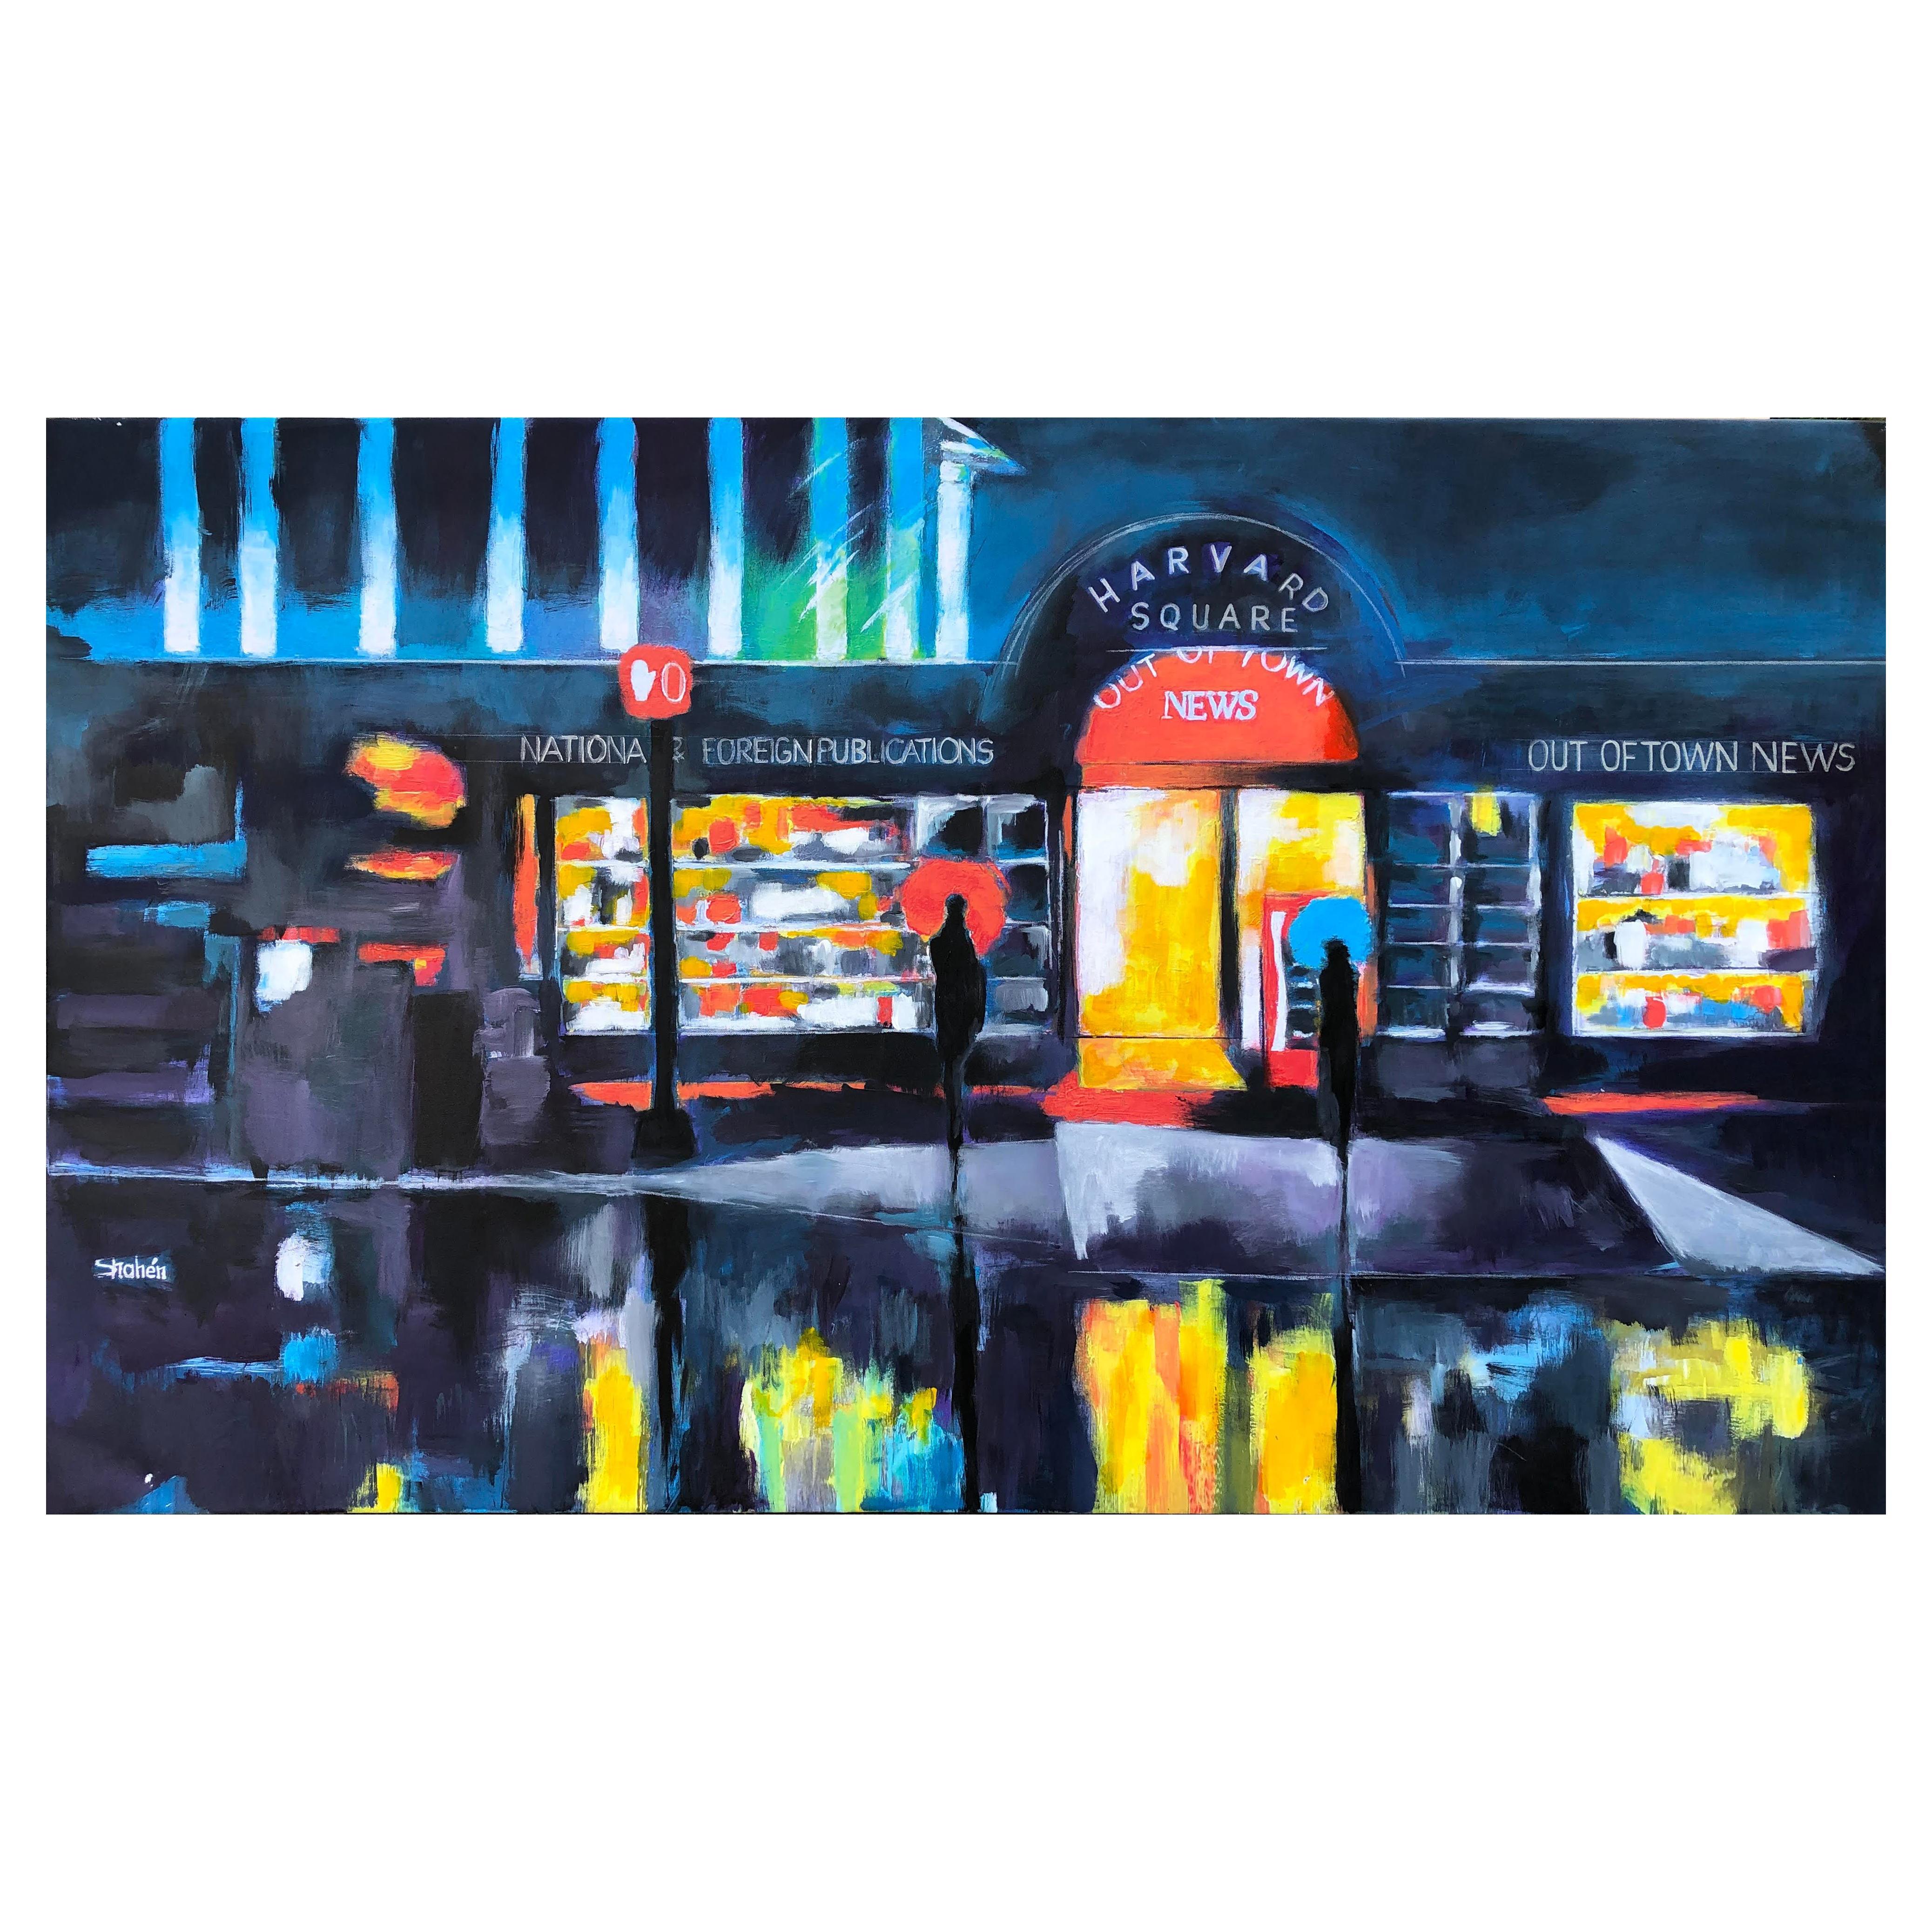 "Harvard Square Newsstand", Mixed Media on Canvas by Shahen Zarookian